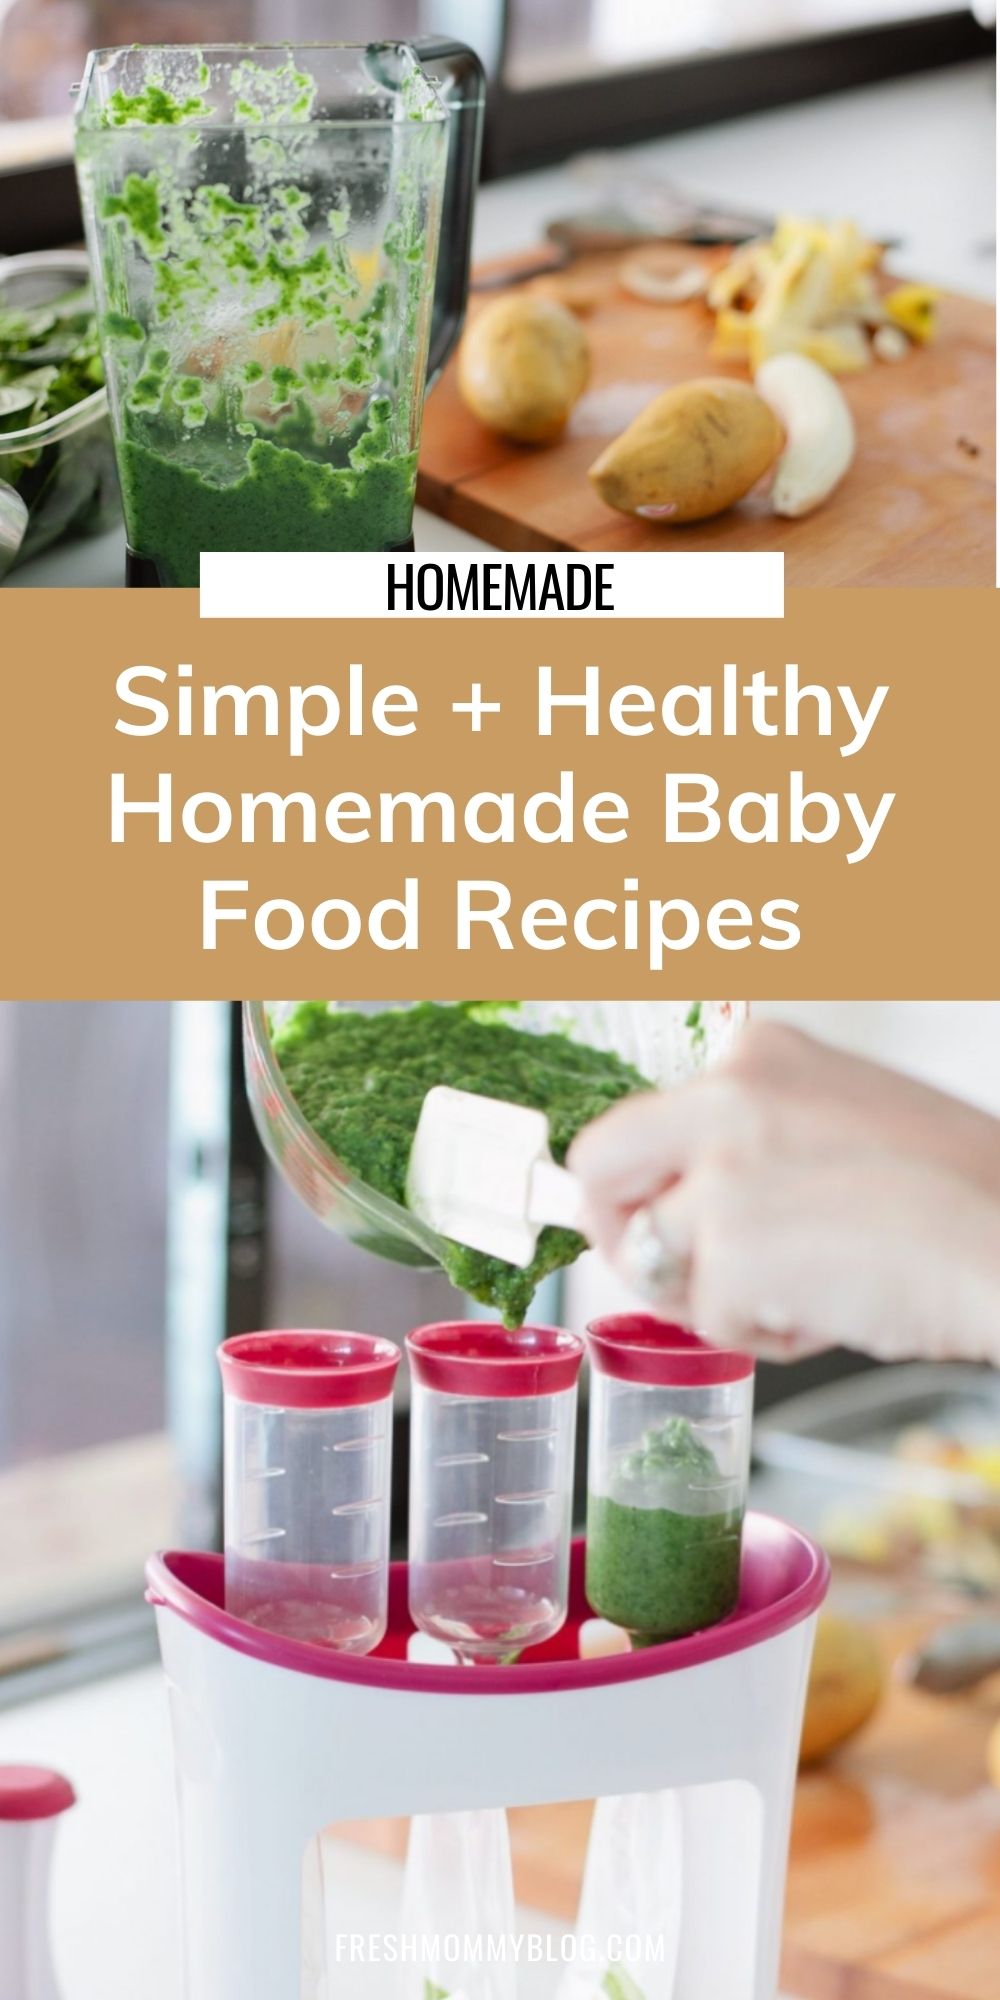 Easy and Simple Homemade Baby Food recipes and tips for making healthy homemade baby food right in your kitchen by popular Florida mom blogger Tabitha Blue of Fresh Mommy Blog. 